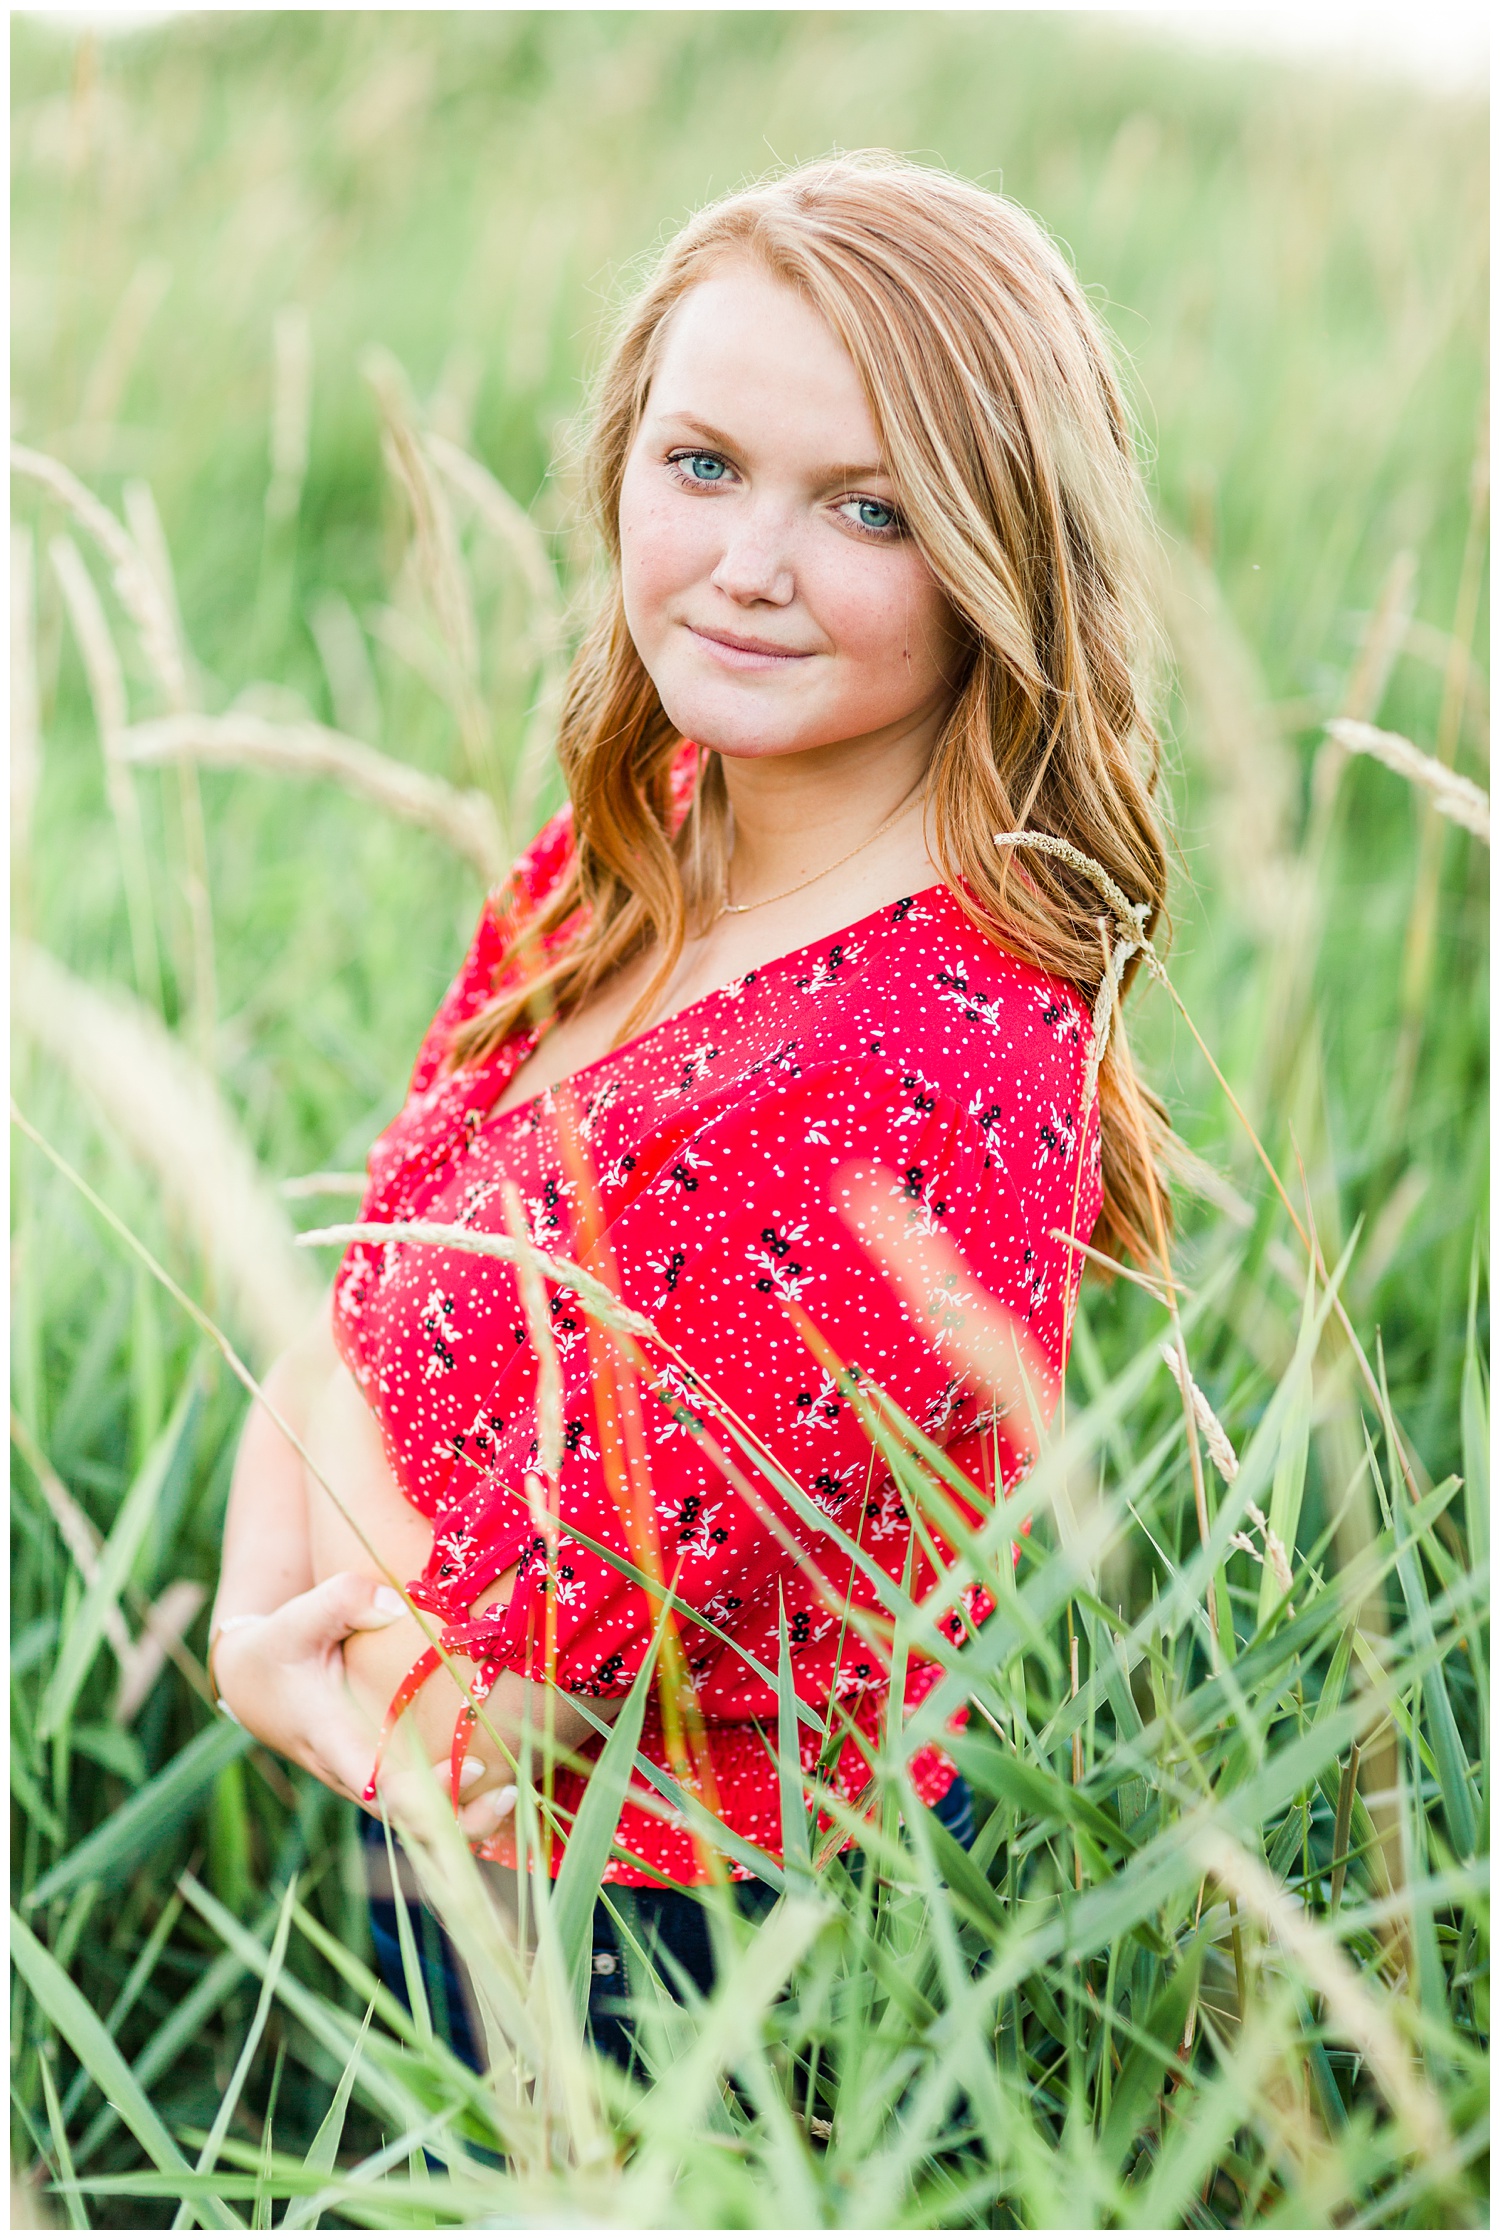 Senior girl wearing a red floral blouse standing in a grassy field at Smith Lake, Algona, Iowa | CB Studio